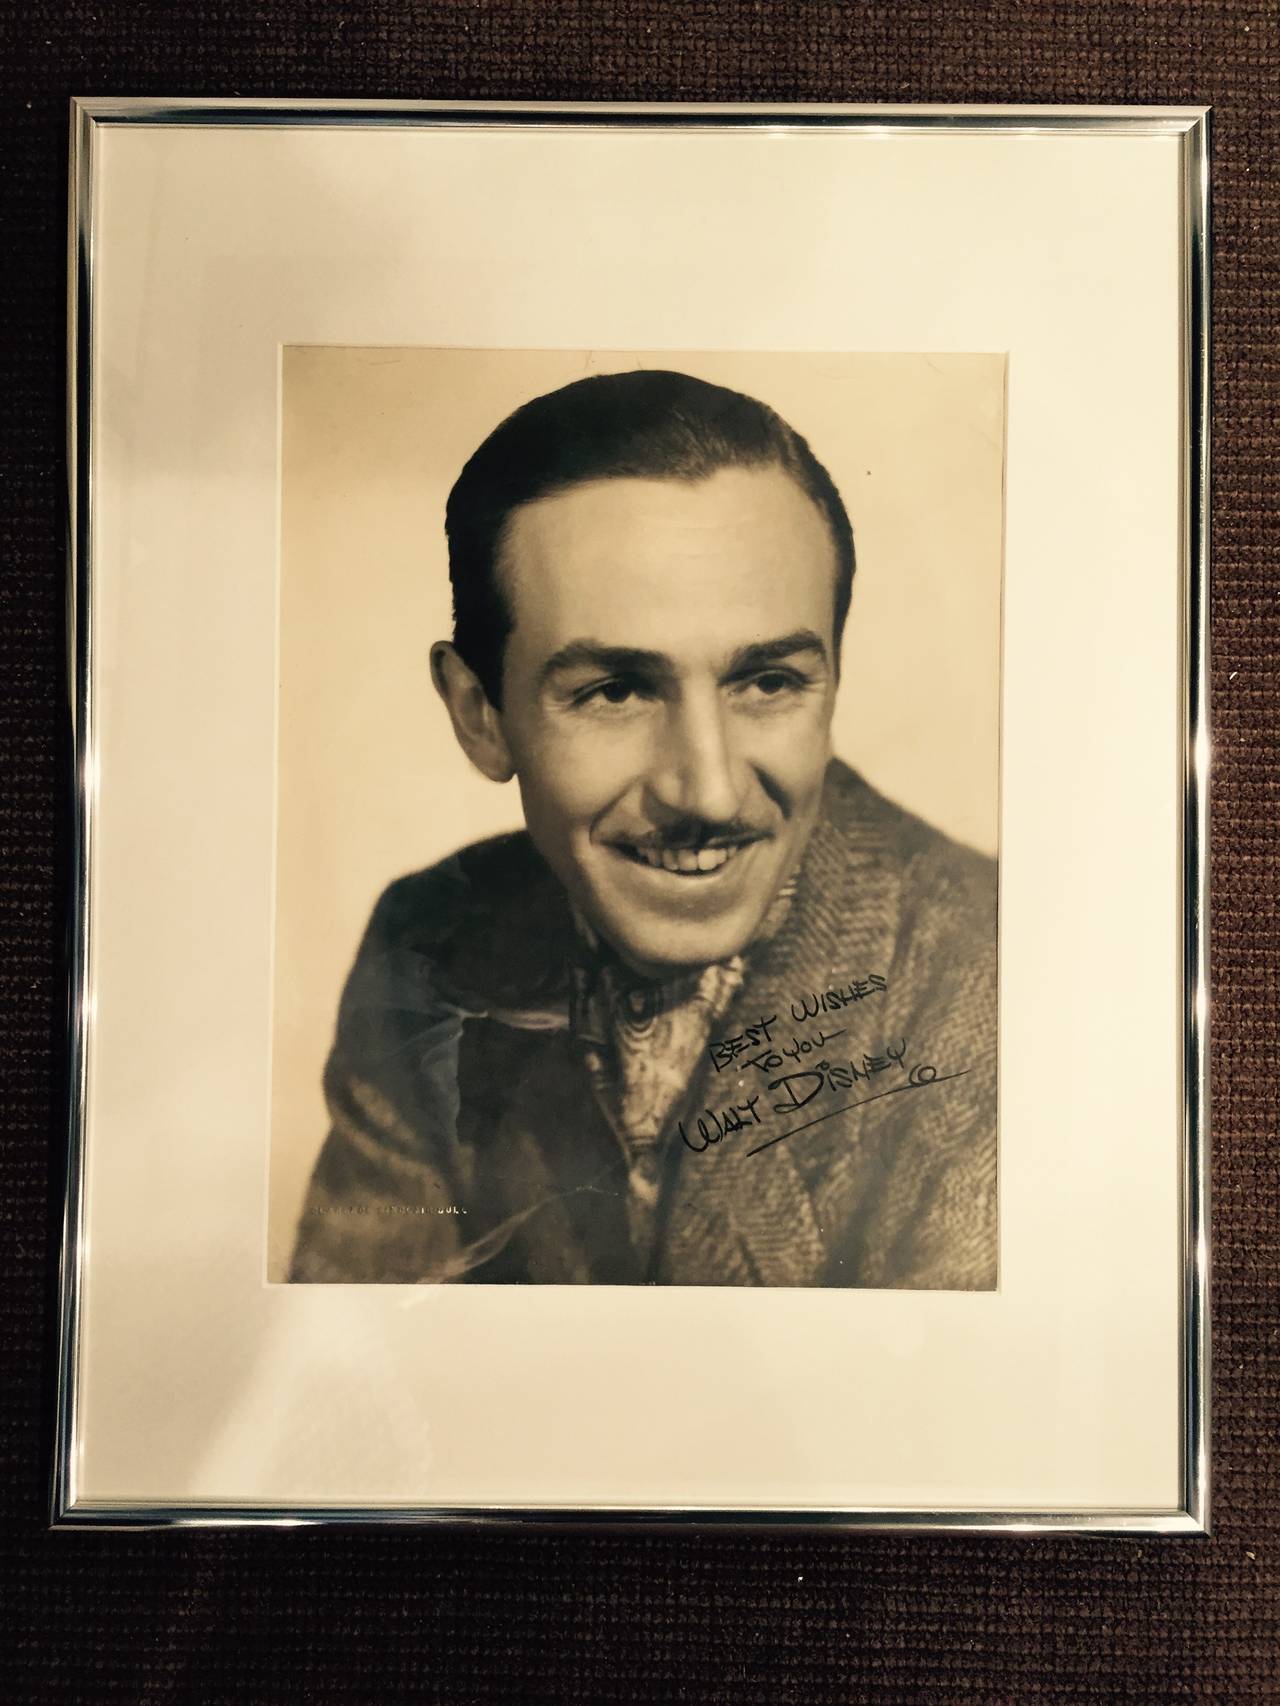 Rare autographed Walt Disney Silver Print Hollywood famed photographer.
Clarence Sinclair Bull 1896-1979 worked for Metro- Goldwyn -Mayer, One of Hollywood, most acclaimed Photographer famous for his Photo's of Greta Garbo and stars of the early